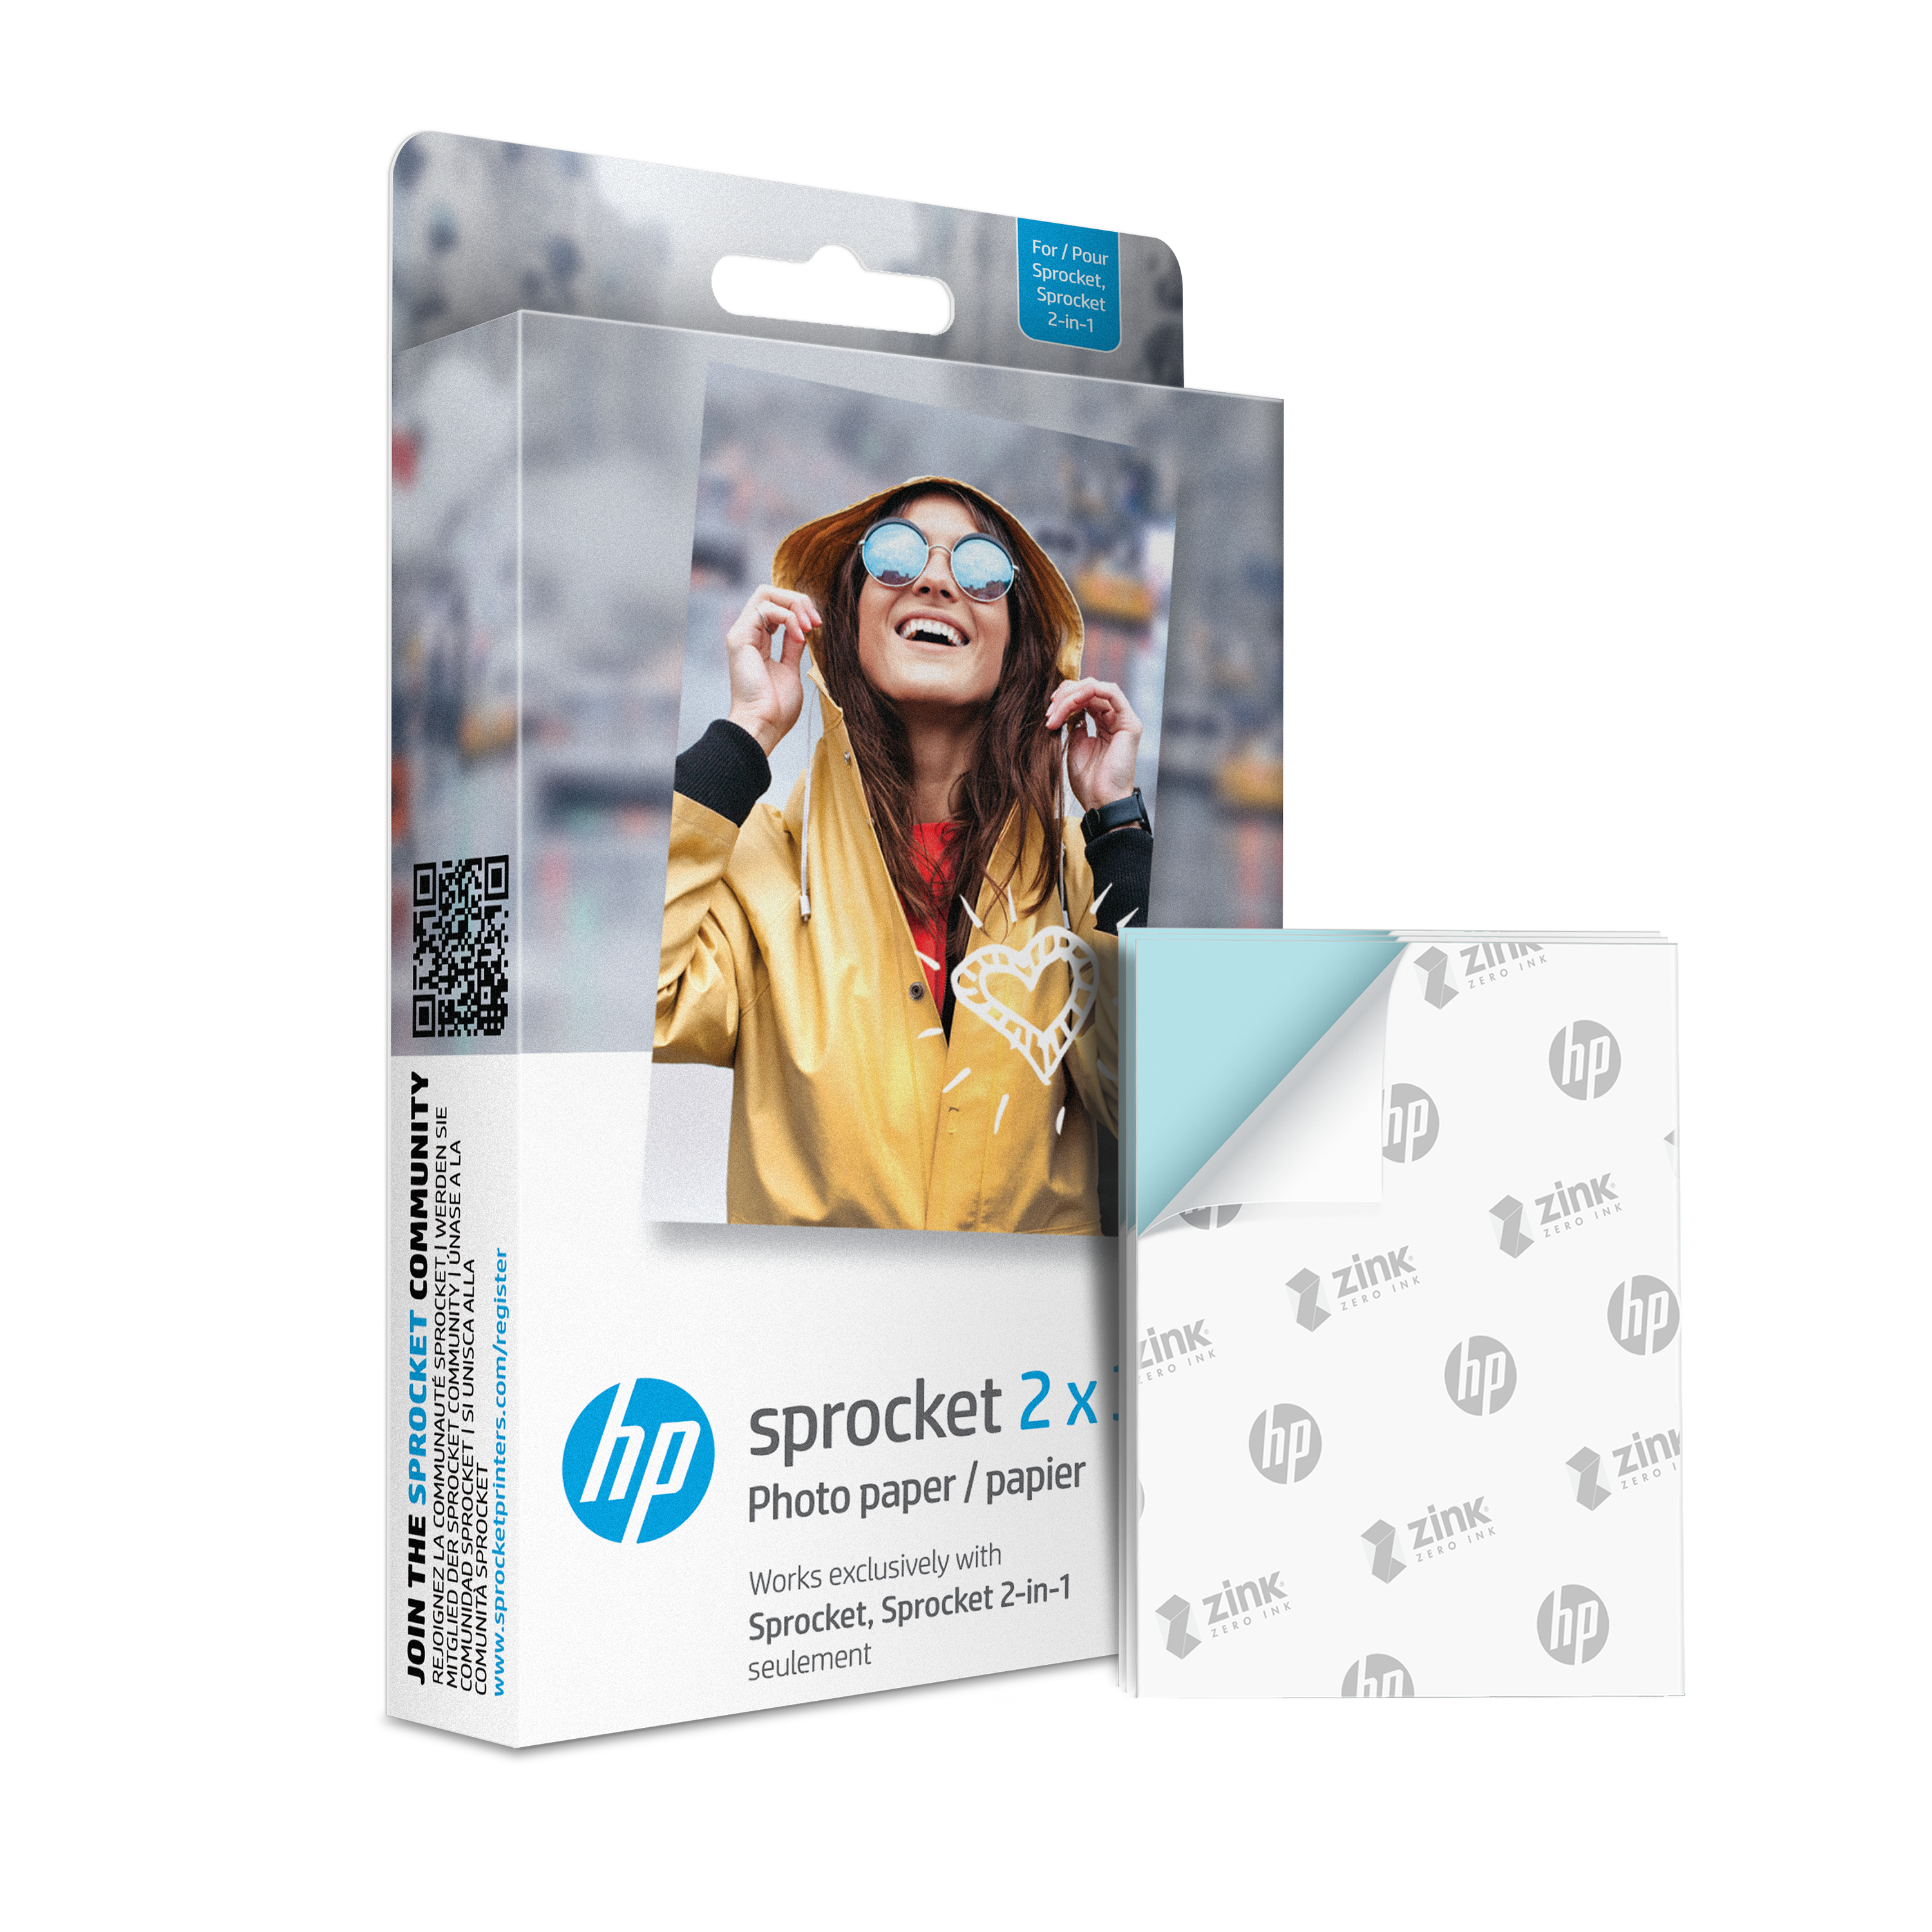 HP Sprocket 2x3 Premium Zink Sticky Back Photo Paper (20 Sheets)  Compatible with HP Sprocket Photo Printers.